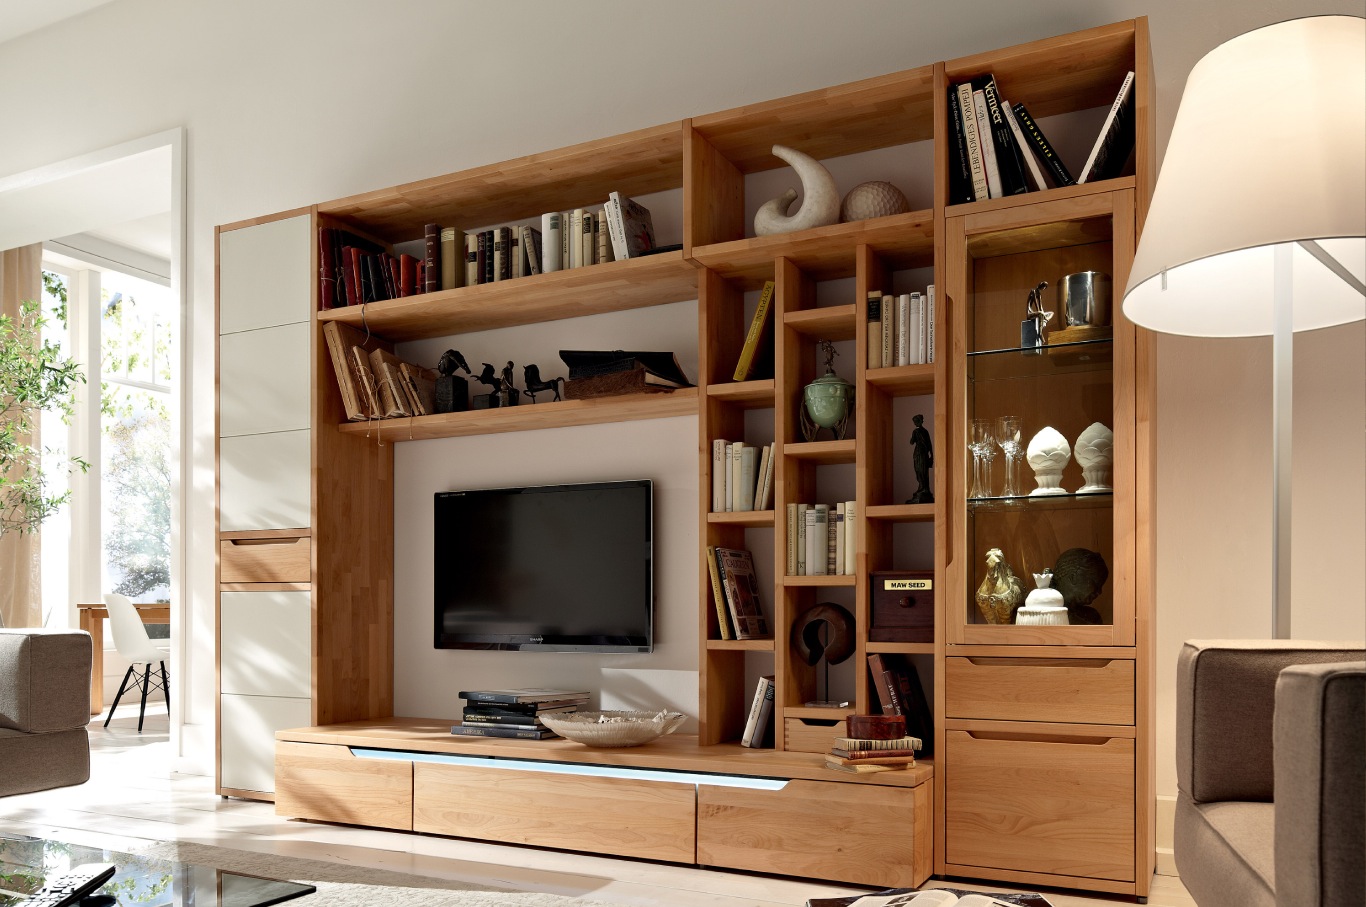 Tv Fireplace Wall Unit Designs New Wooden Finish Wall Unit Binations From Hülsta